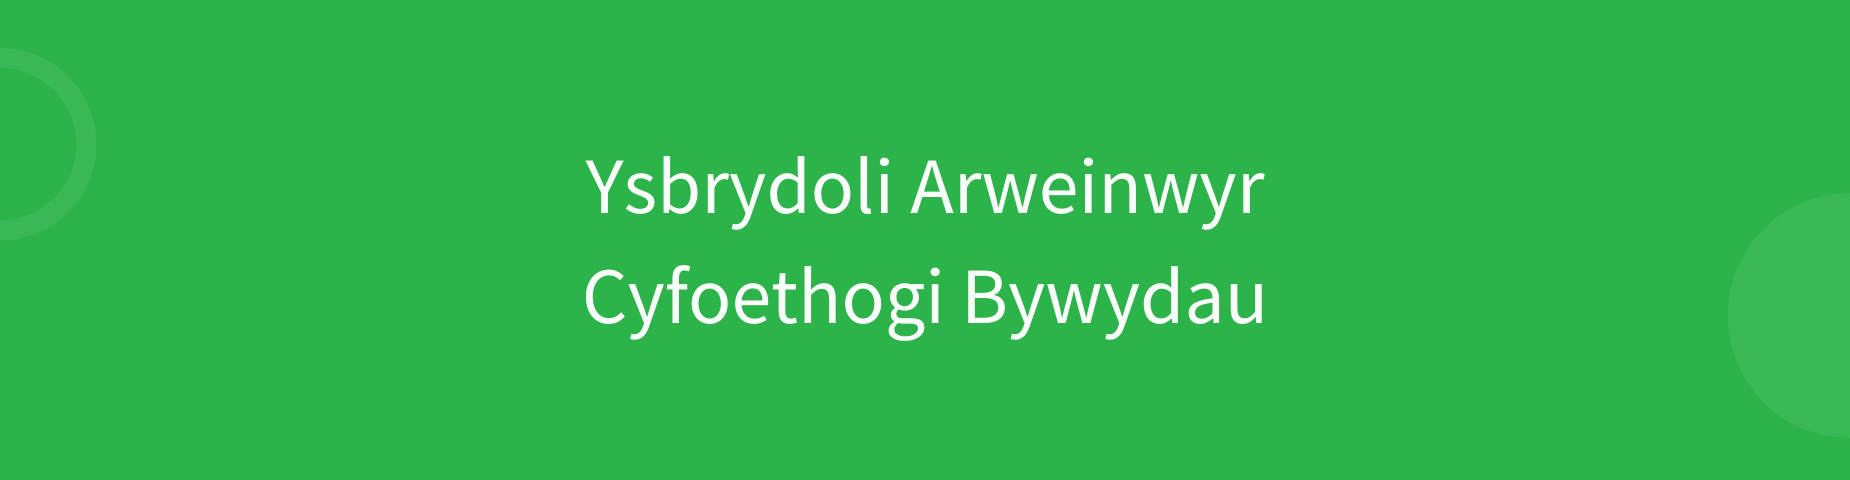 About Us Header Welsh